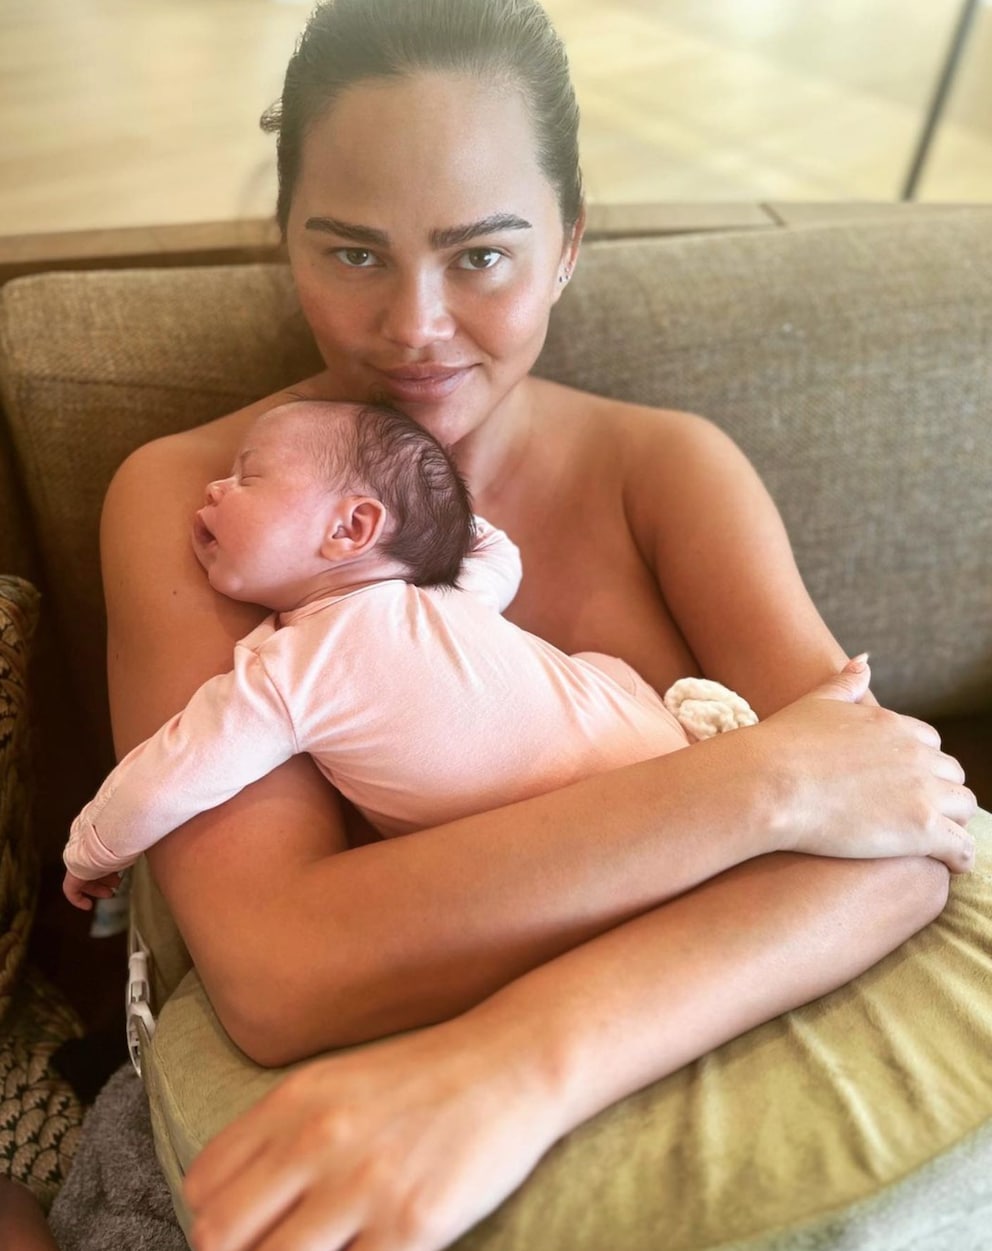 US model Chrissy Teigen has her third child’s umbilical cord blood stored.